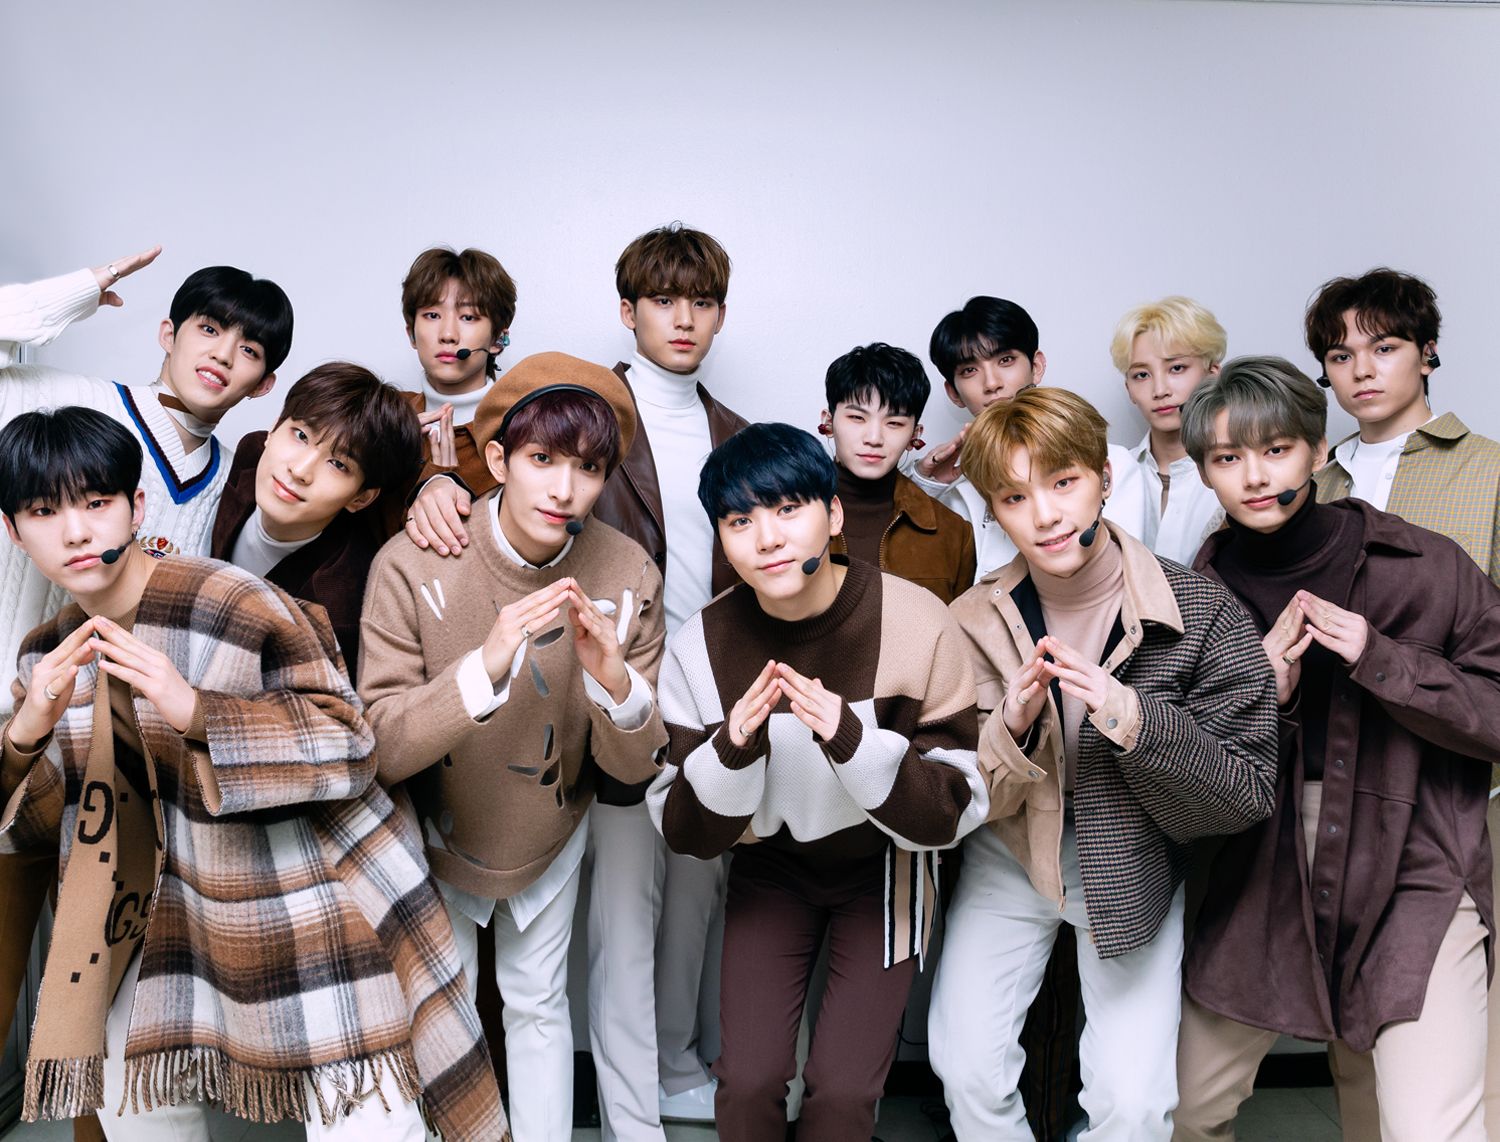 bts-nct-seventeen-top-boy-group-brand-reputation-rankings-in-february